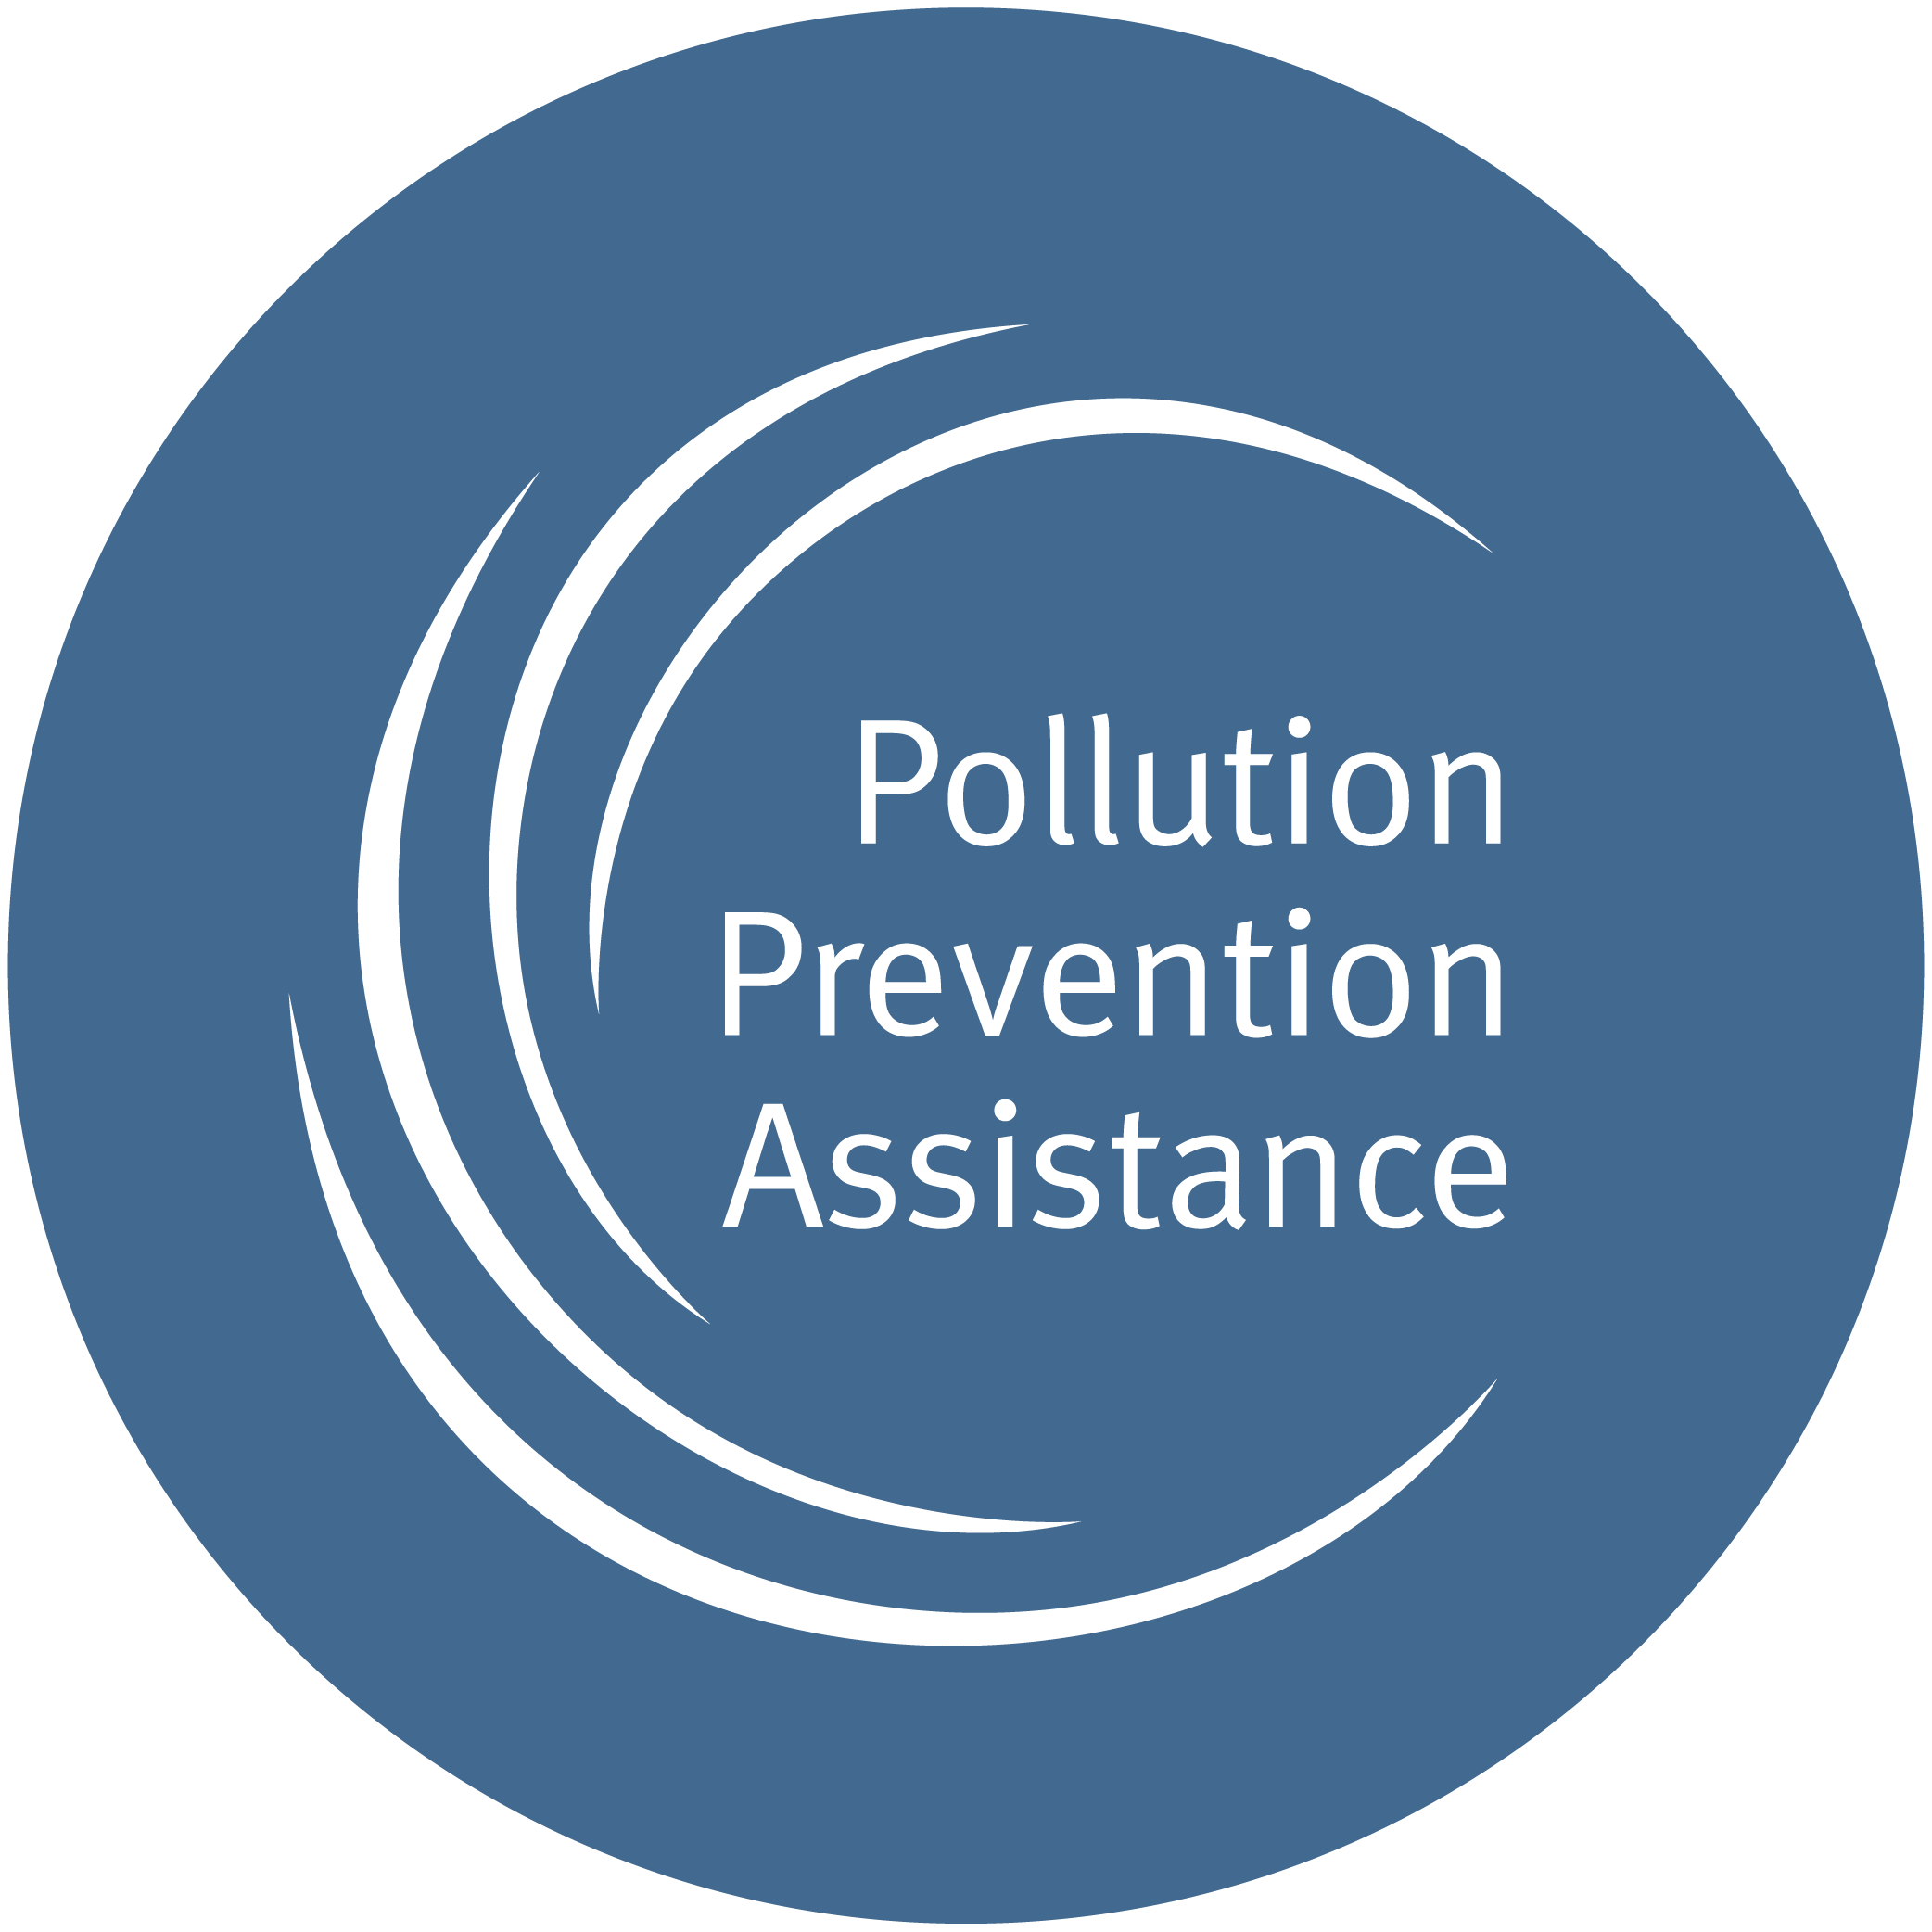 Click the image to contact a Pollution Prevention Assistance (PPA) representative